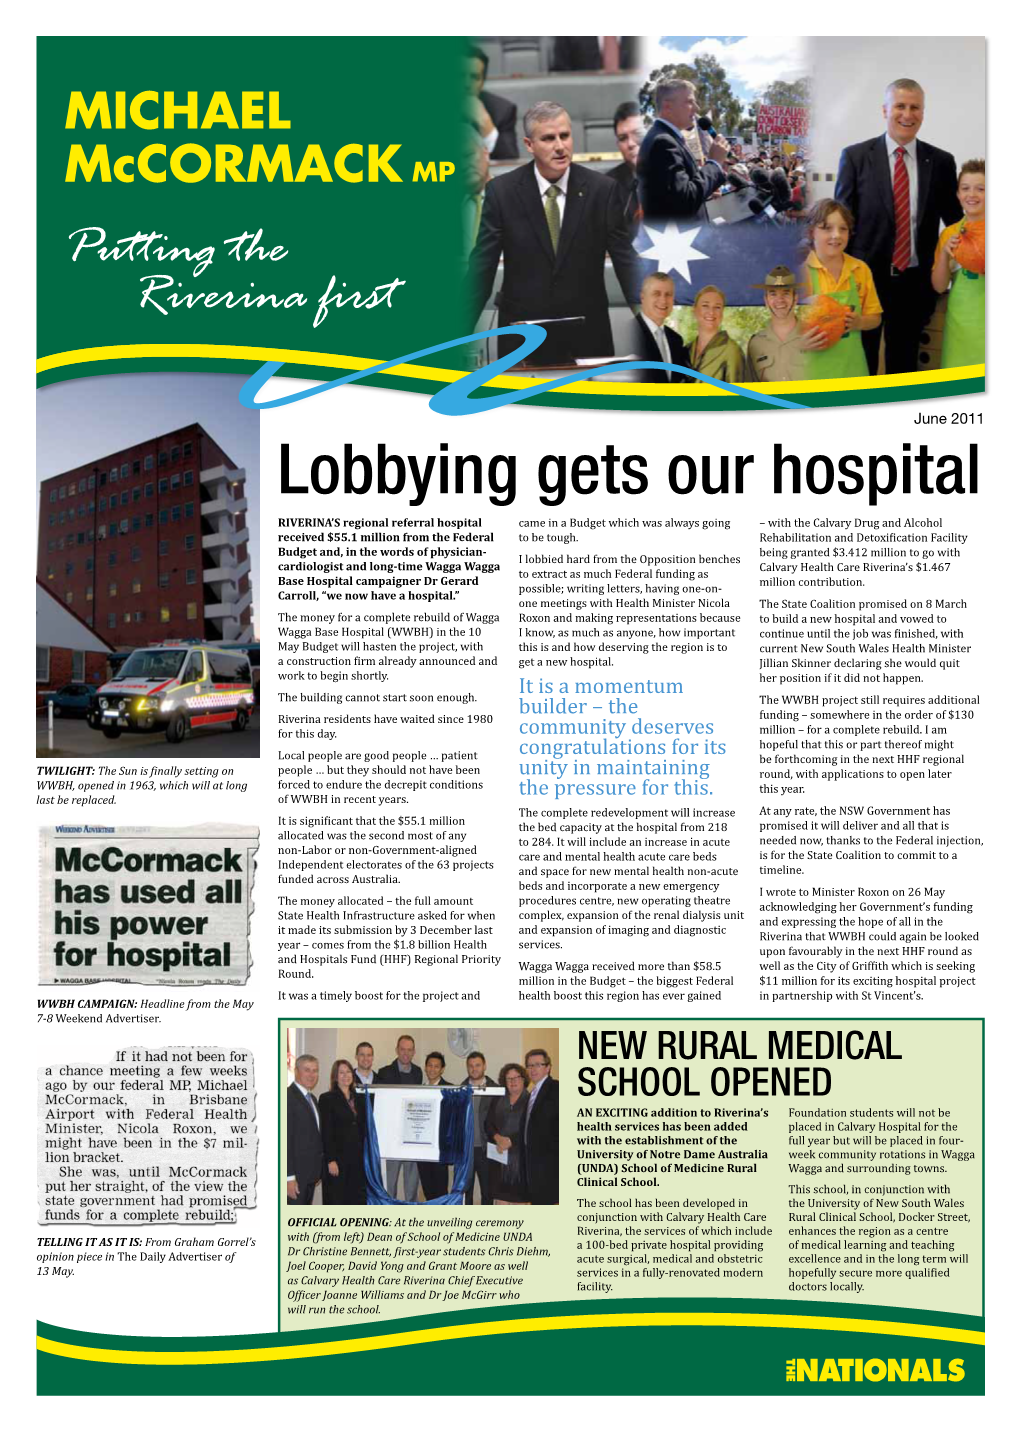 Lobbying Gets Our Hospital